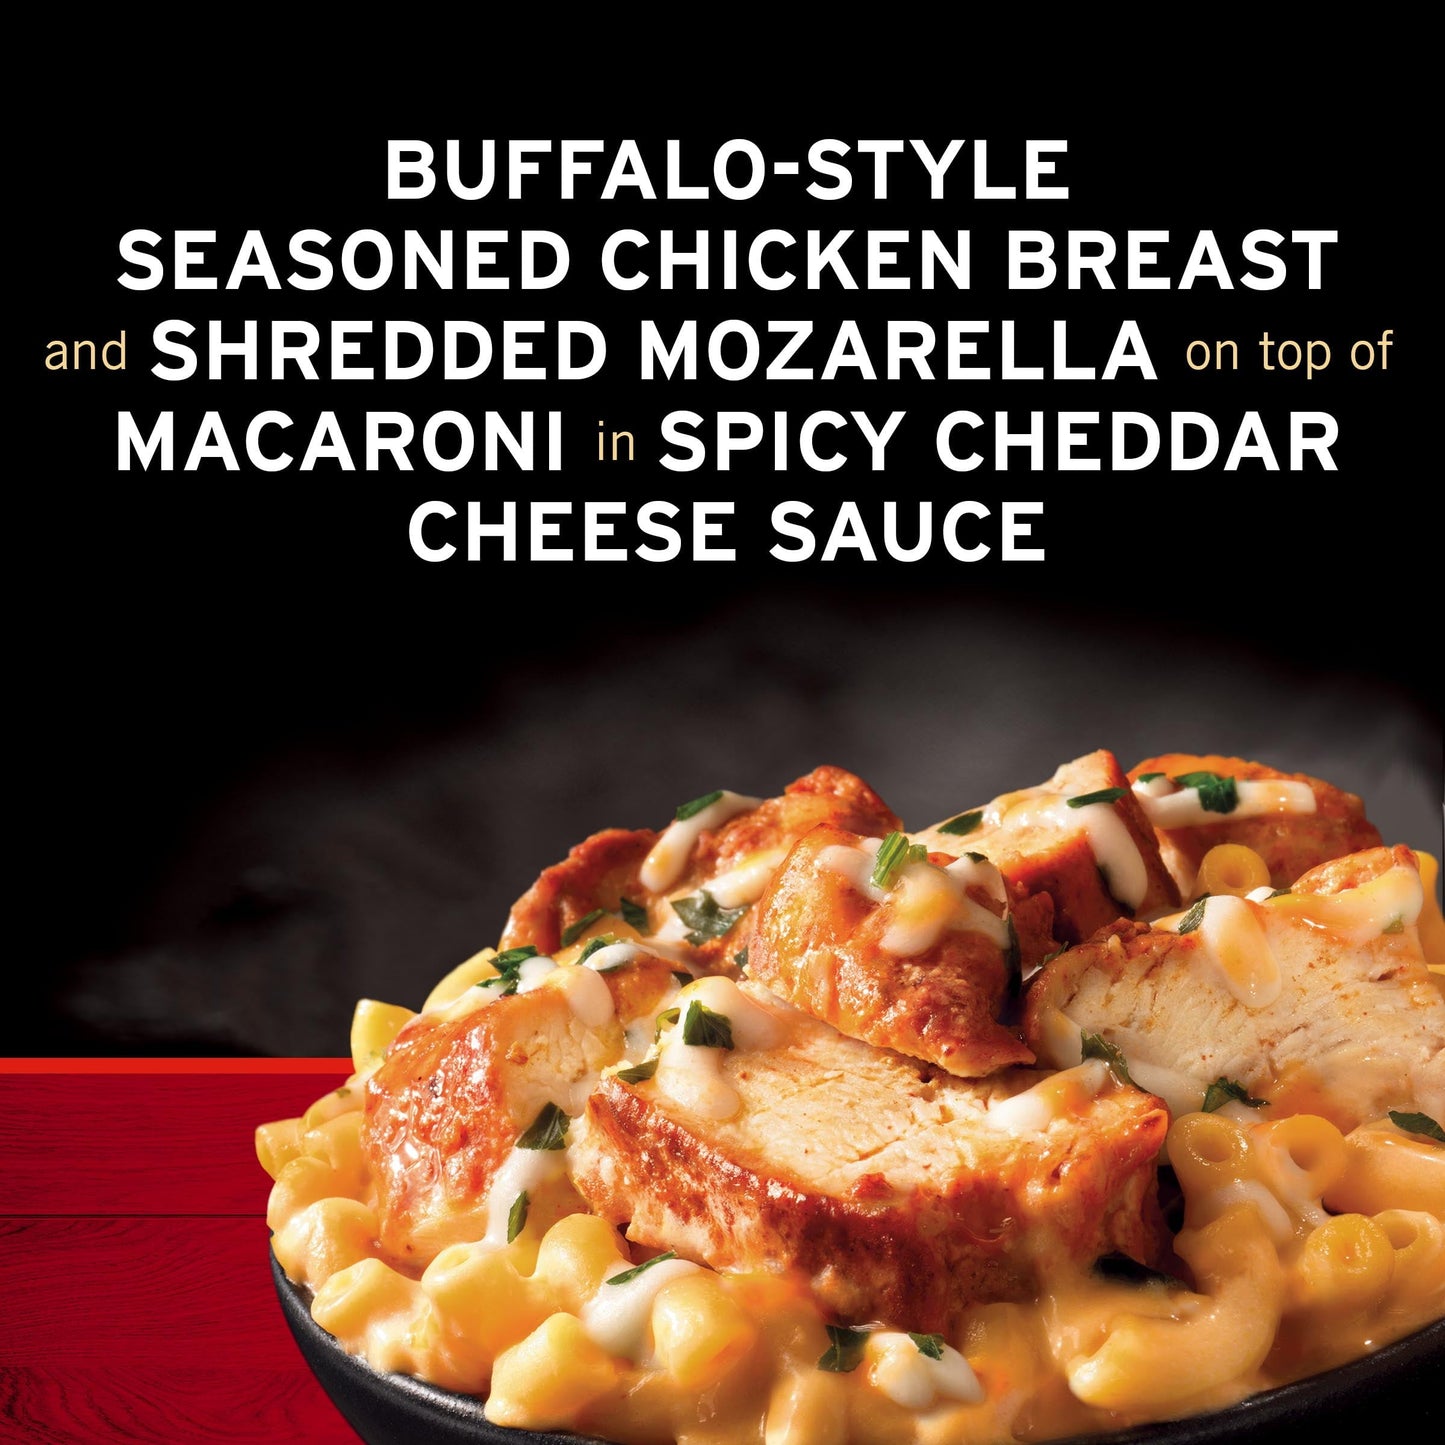 Banquet Mega Bowls Buffalo-Style Chicken Macaroni and Cheese TV Dinner Meal, 14 oz (Frozen)